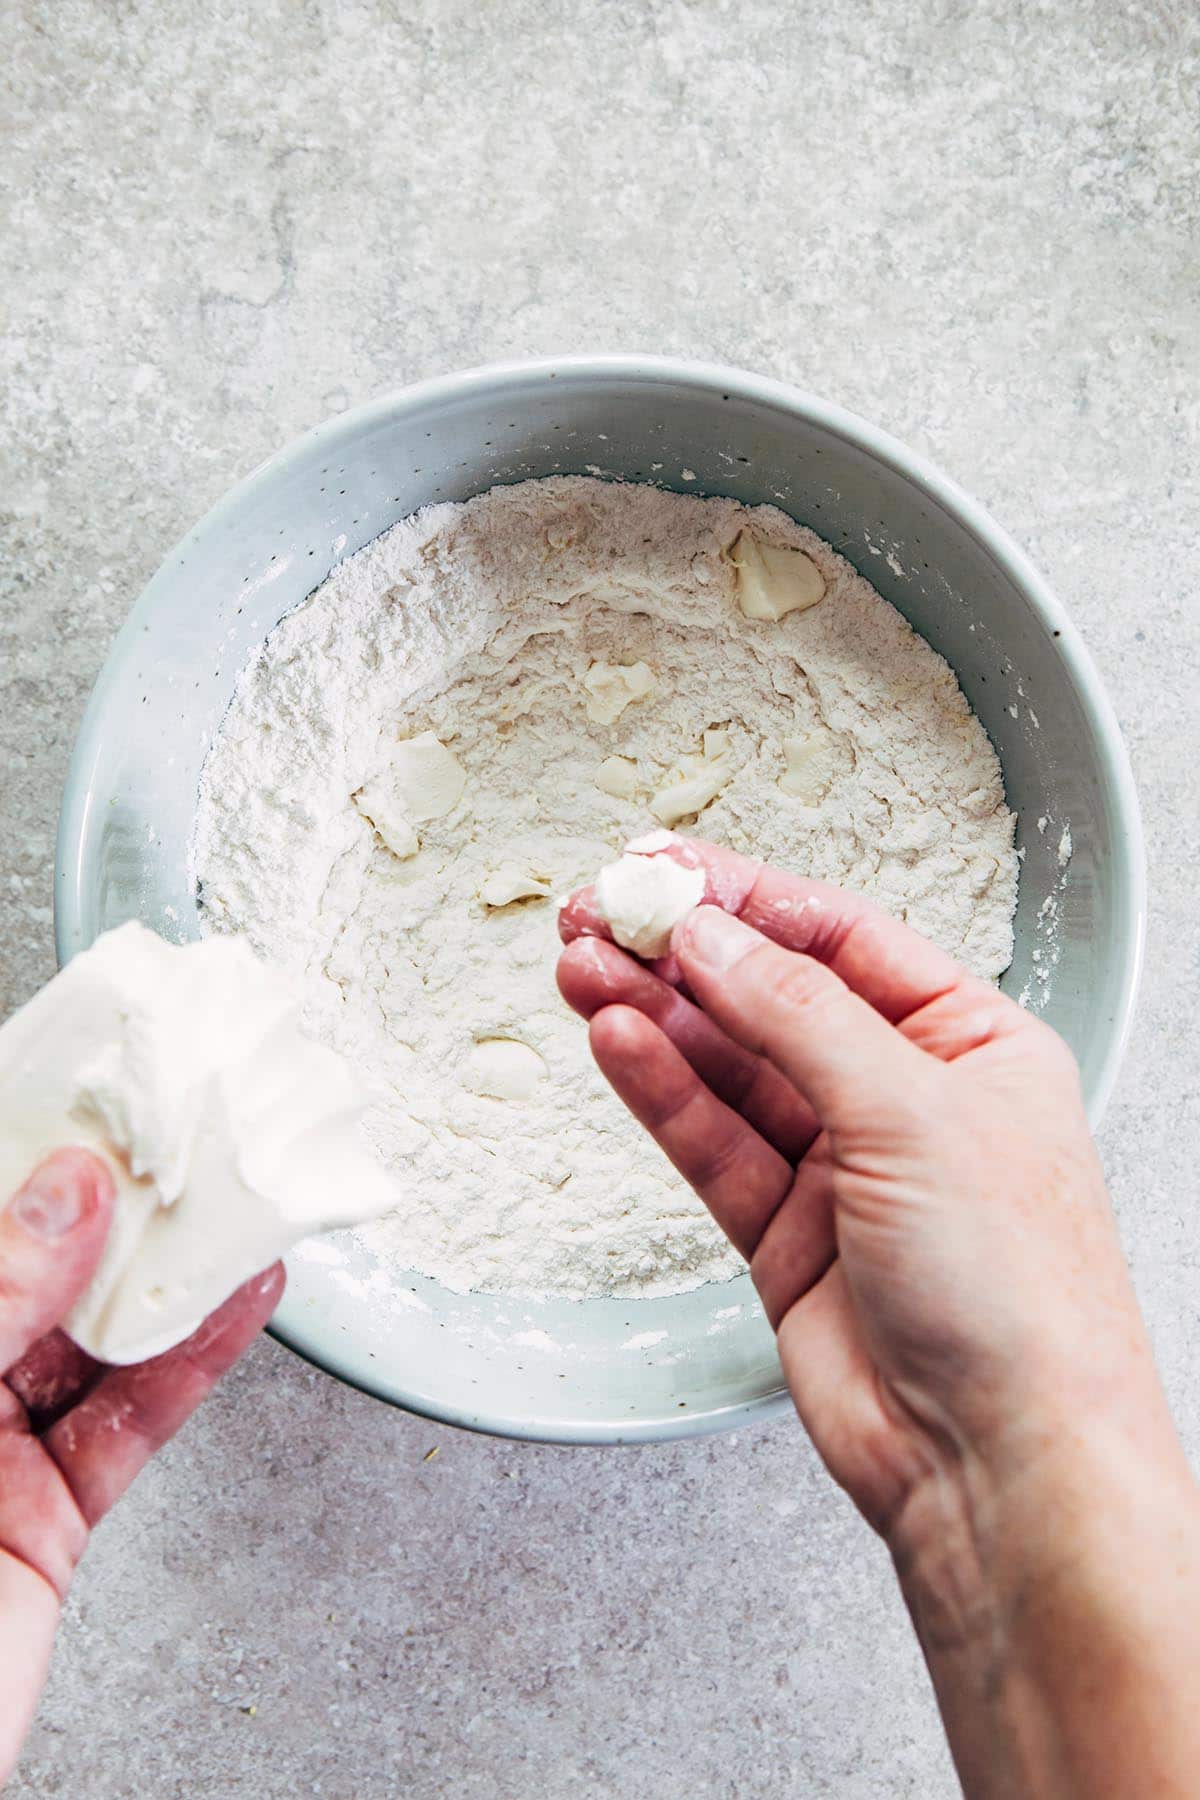 A hand breaking cream cheese into small pieces and placing them in a bowl of flour.